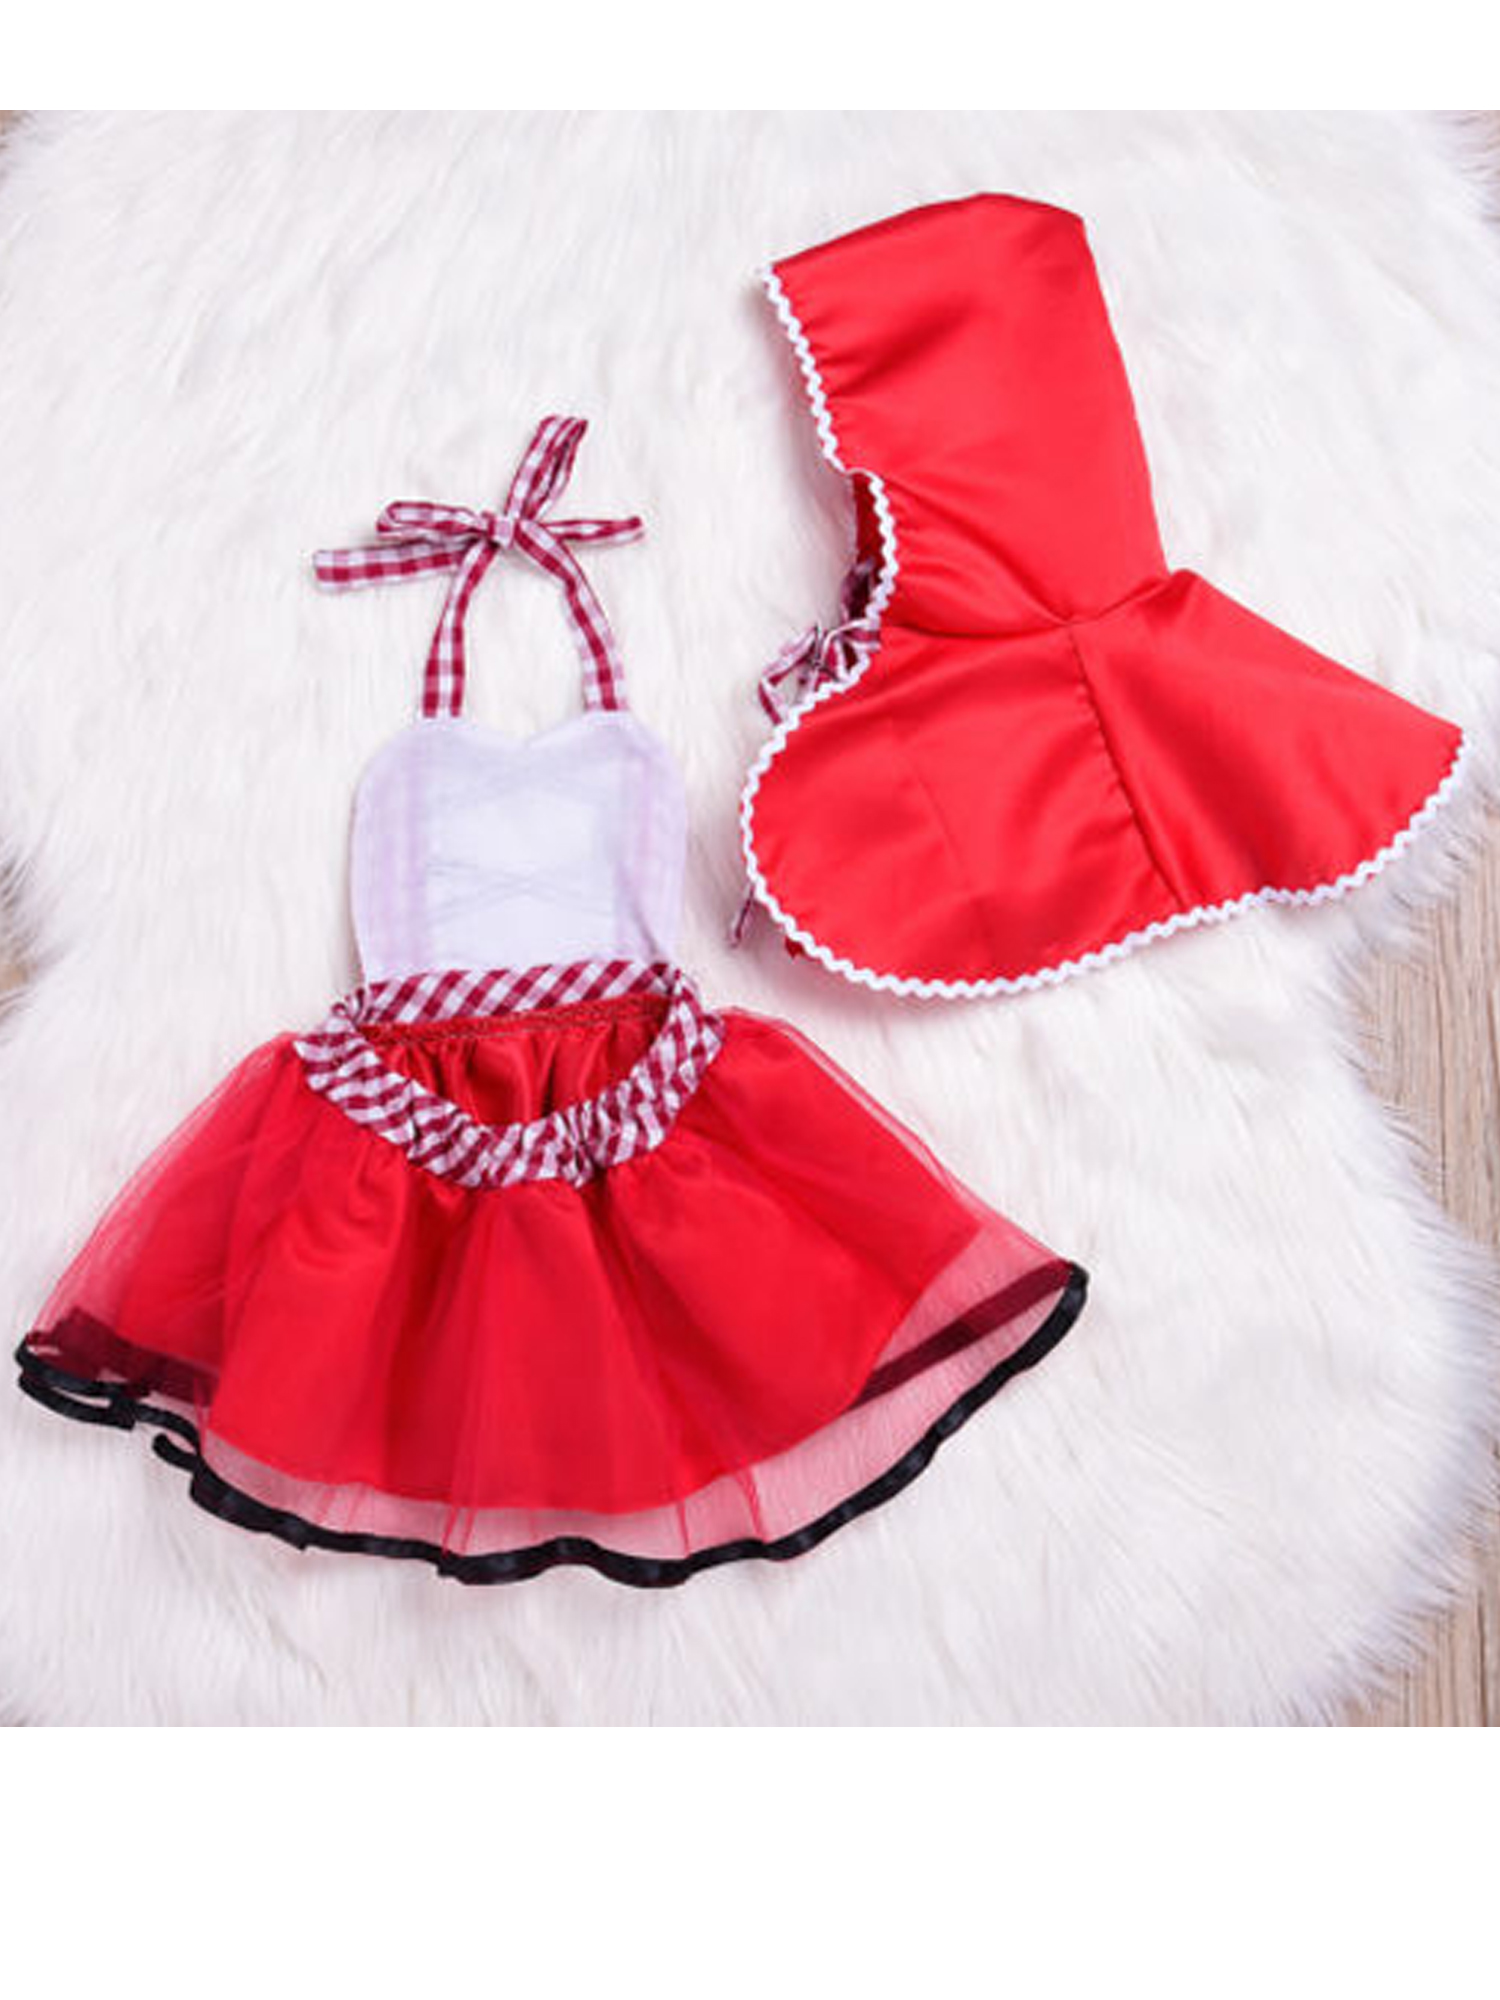 Eyicmarn Cosplay Little Red Riding Hood Garment for Babies with Cape - image 4 of 6